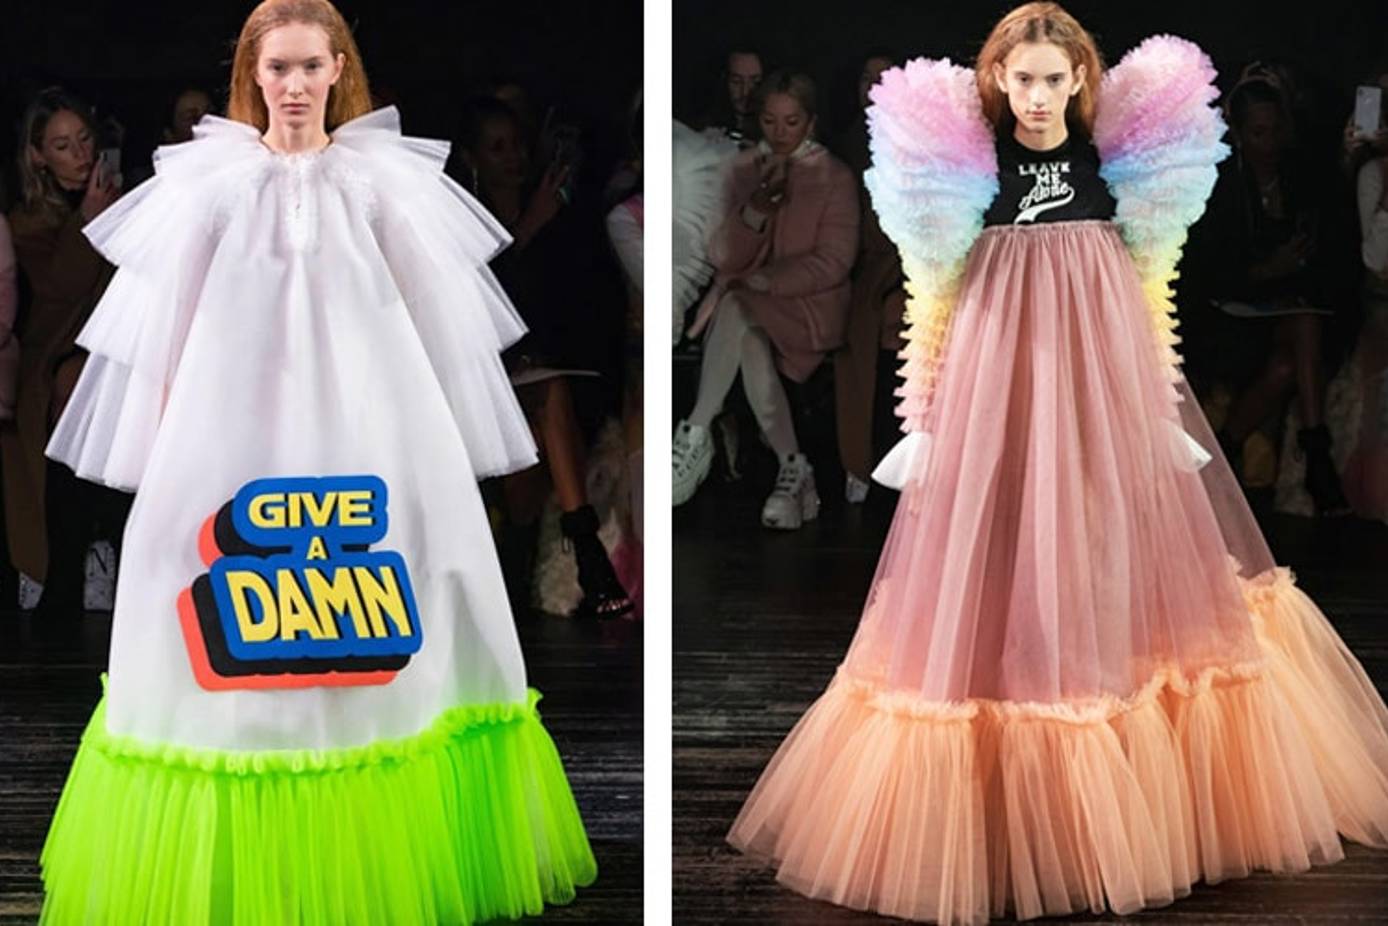 Fashionable feminism at Christian Dior Couture